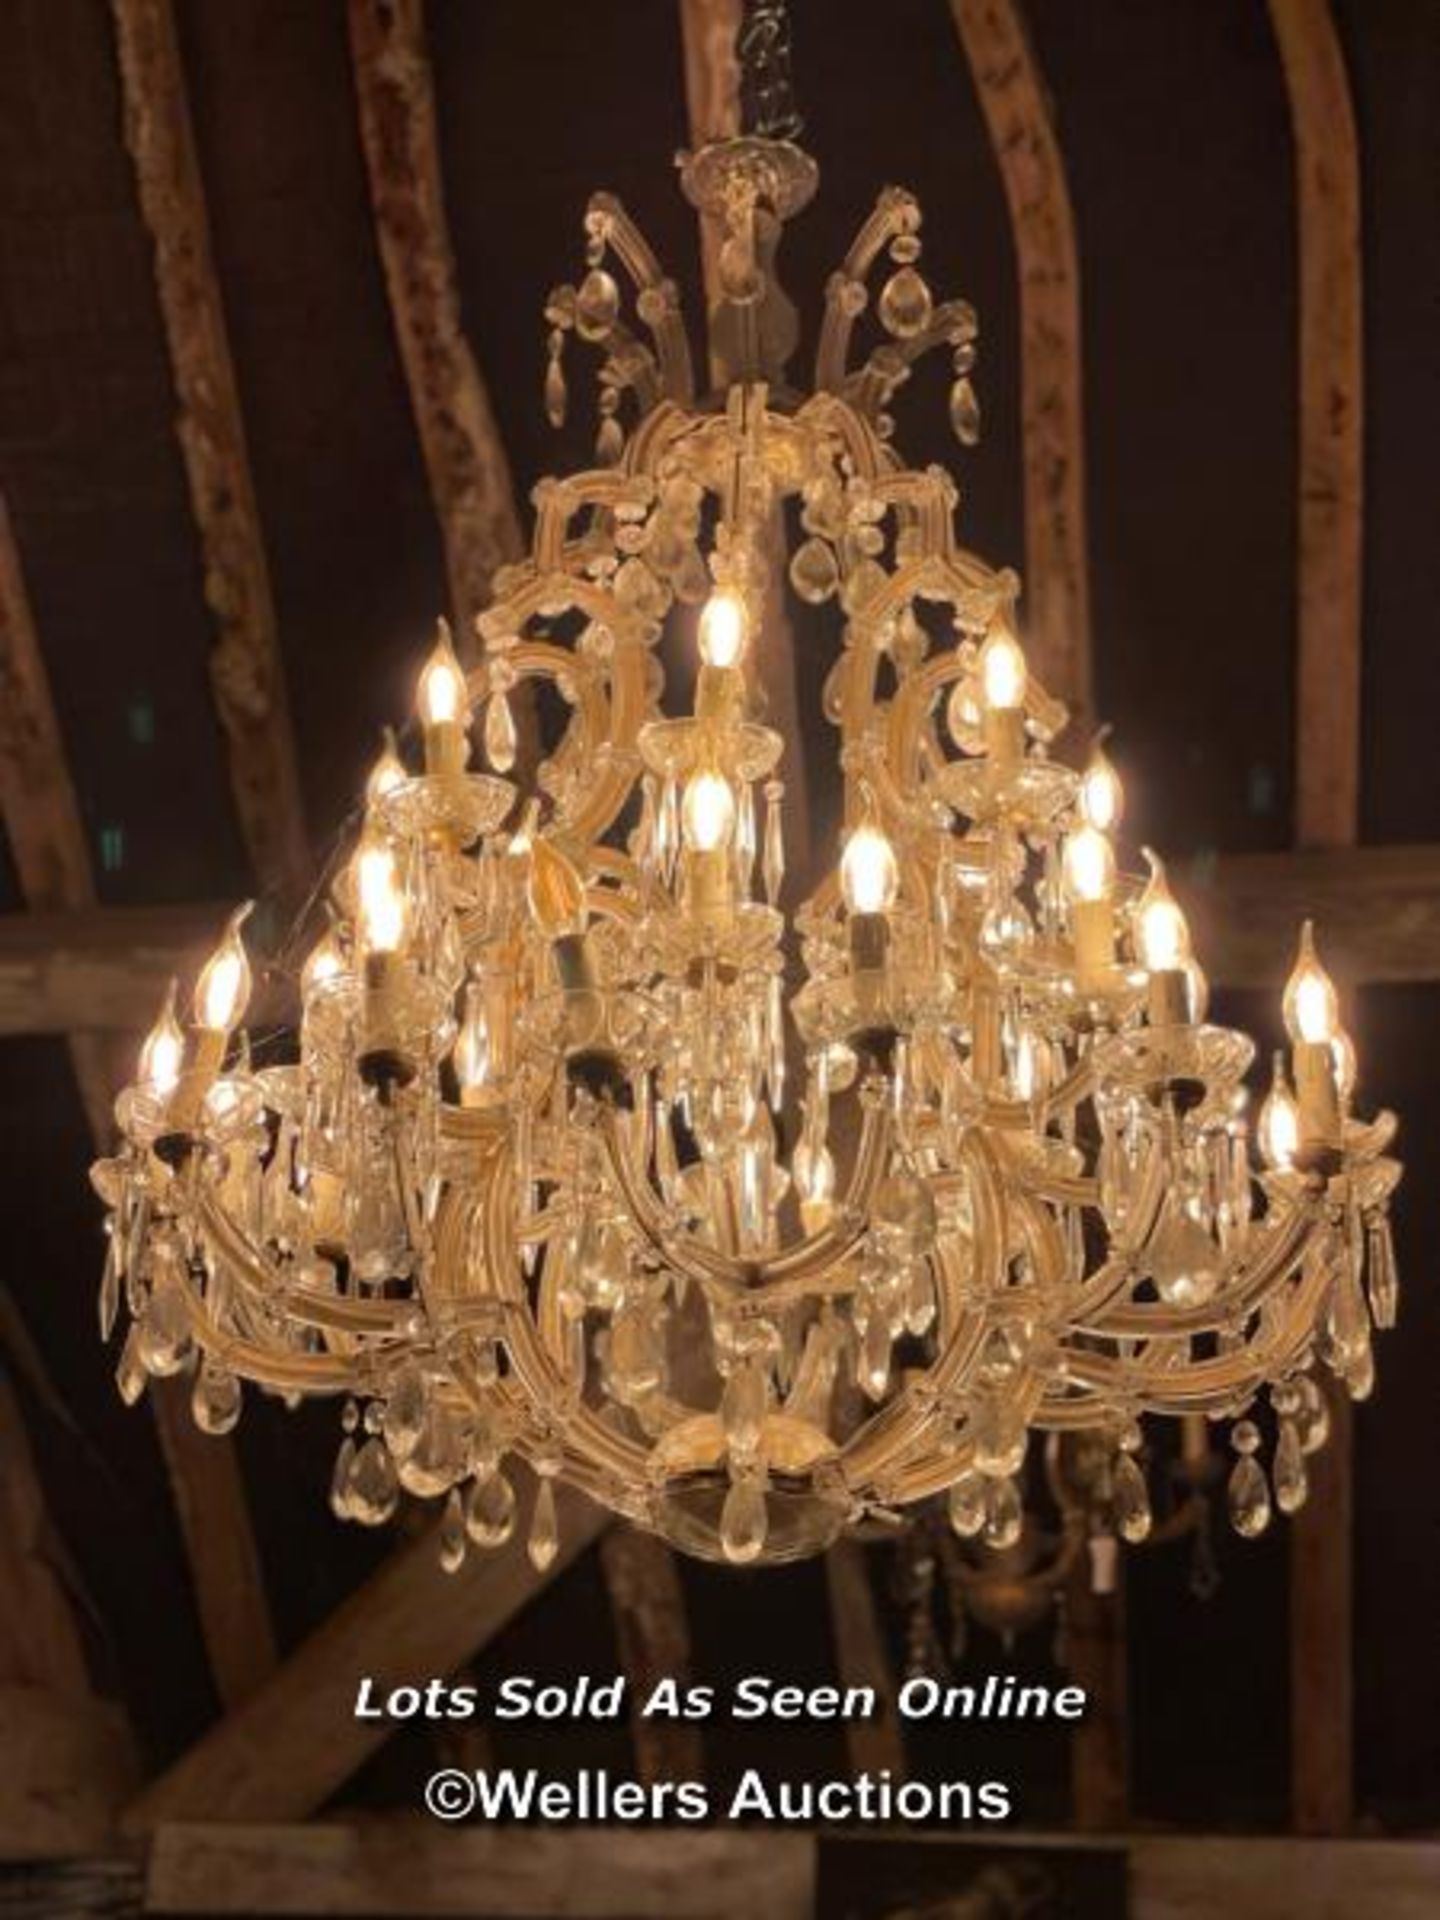 EARLY 20TH CENTURY ITALIAN CHANDELIER, APPEARS TO BE COMPLETE AND WORKING AS SHOWN, SEVEN ARMS SPLIT - Image 7 of 8